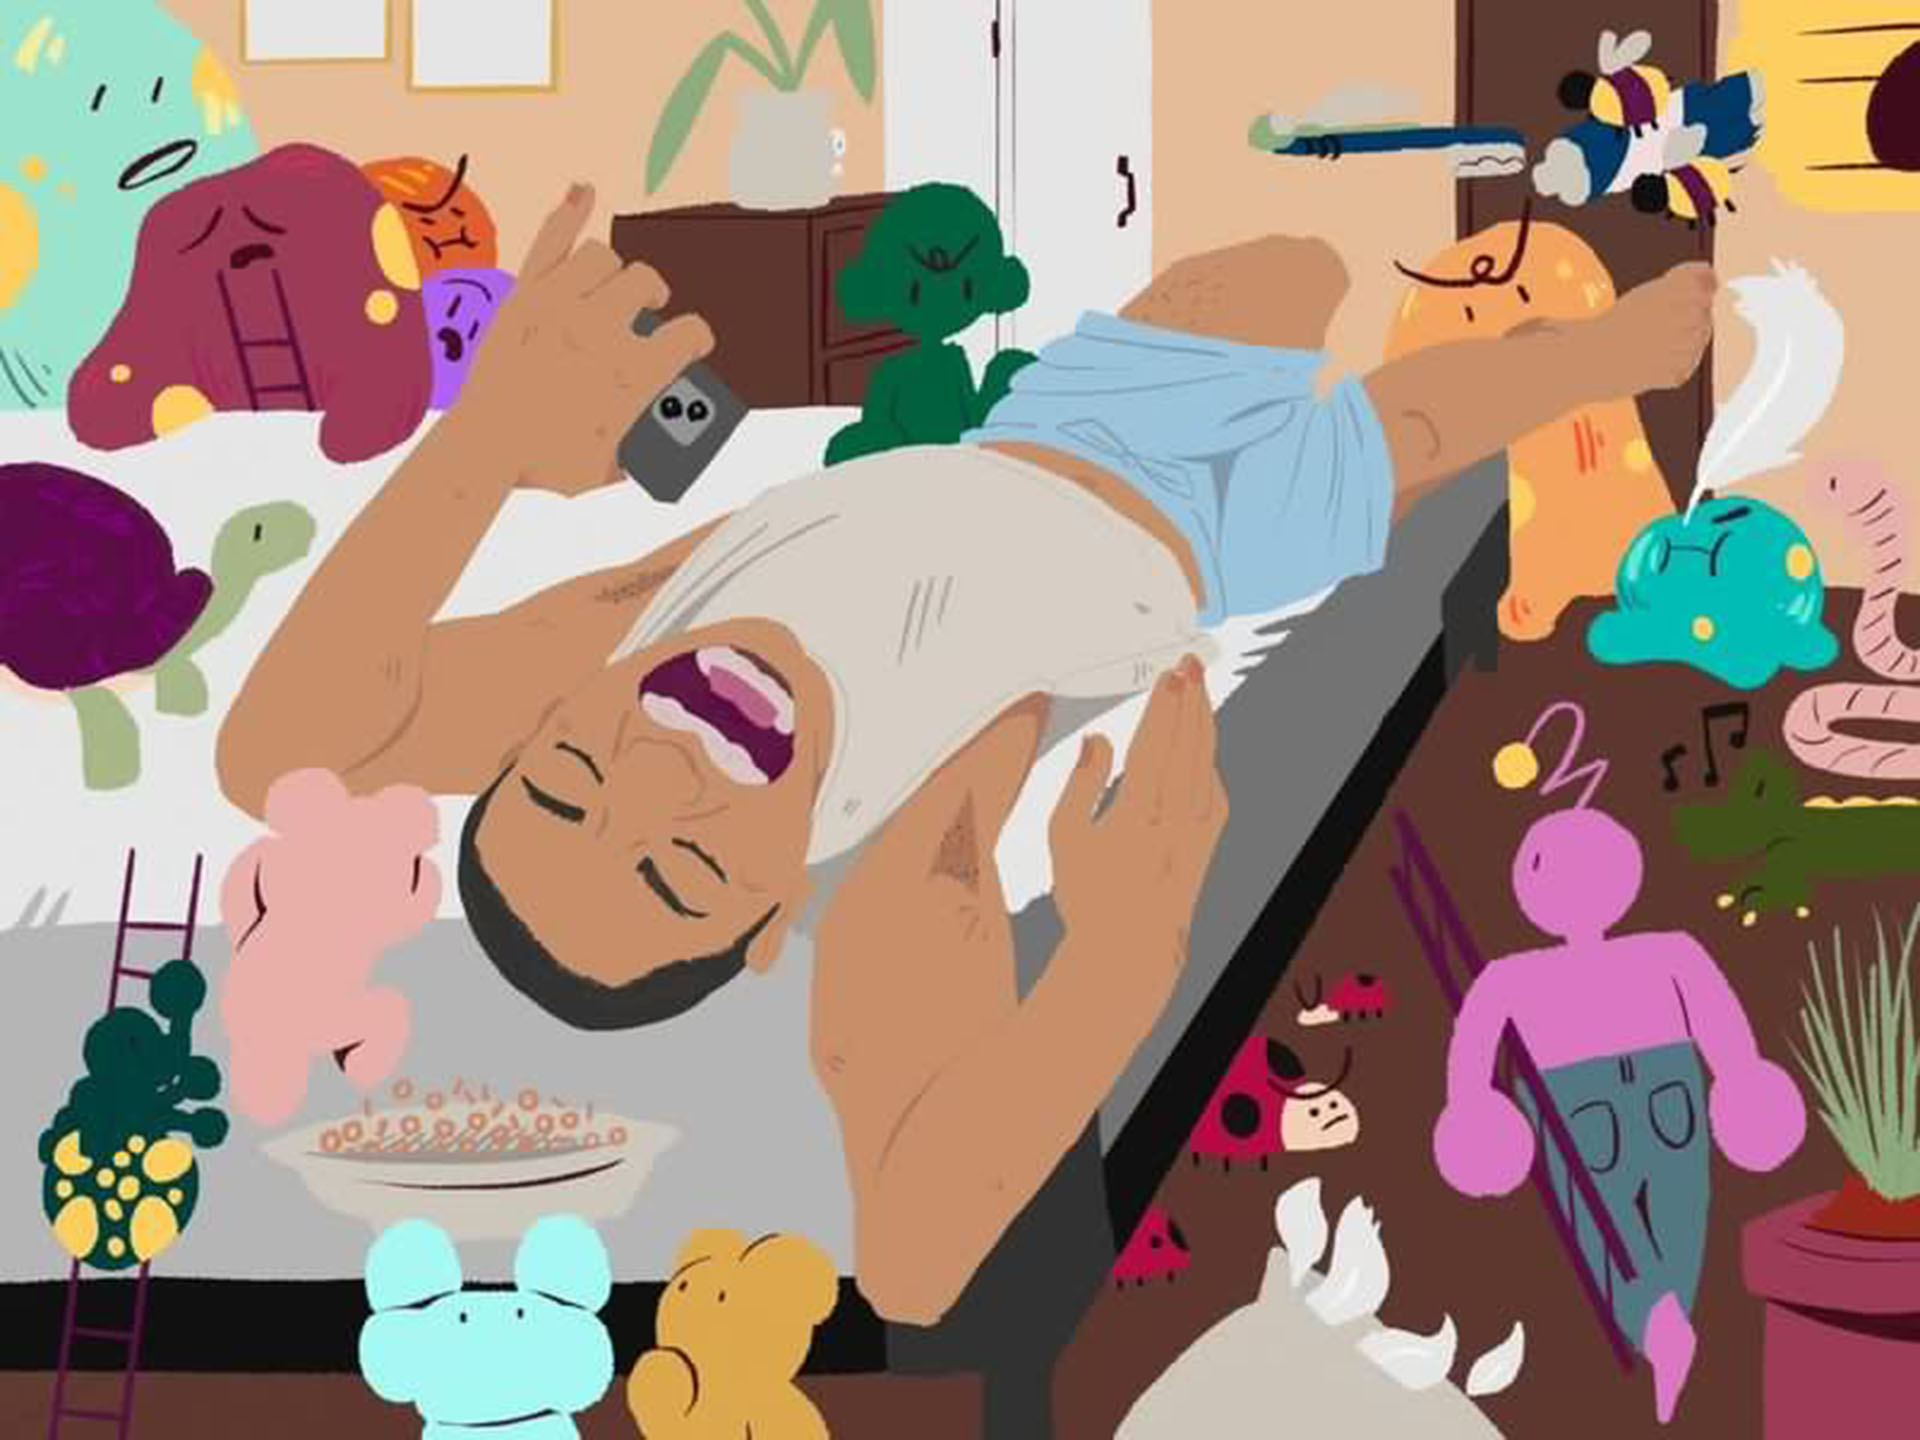 Digital illustration of a boy lying down, surrounded by whimsical doodles.